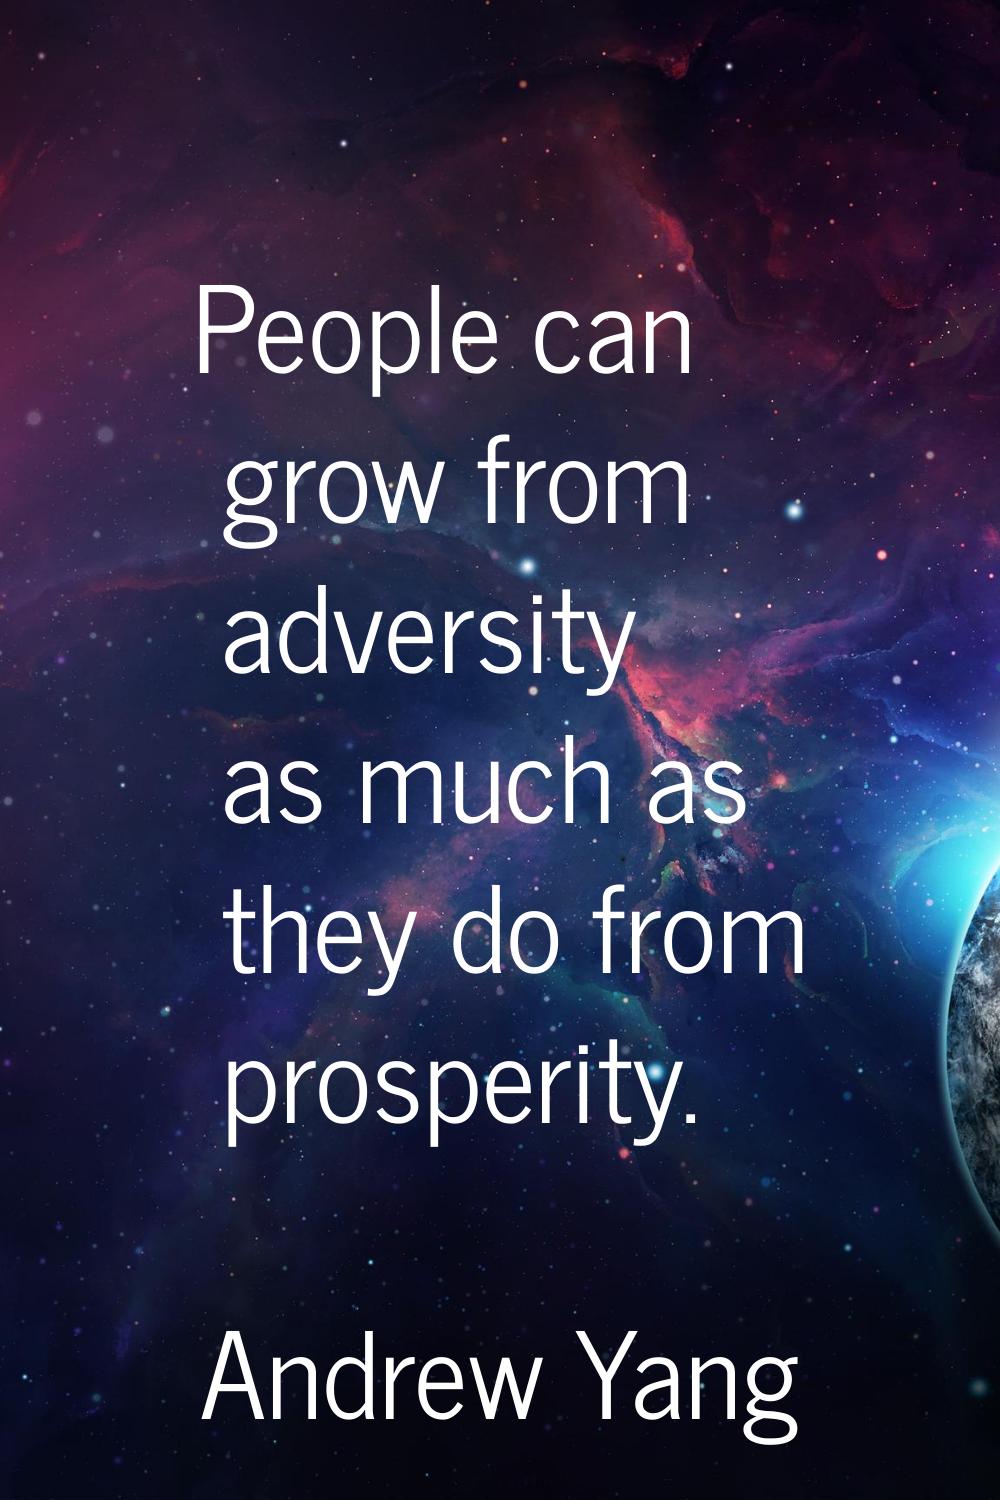 People can grow from adversity as much as they do from prosperity.